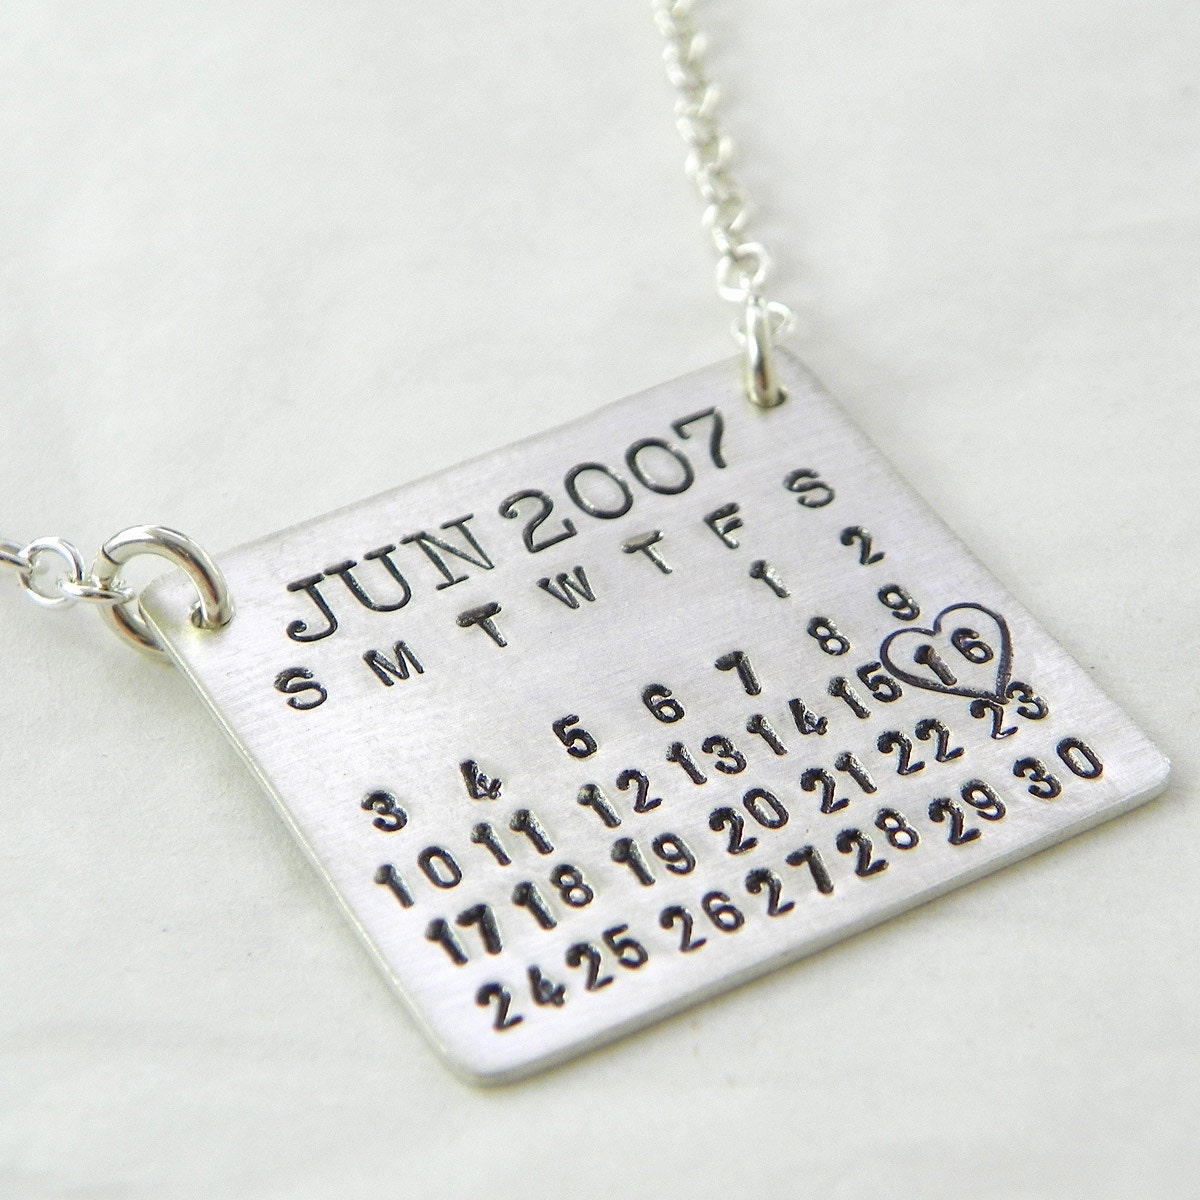 Mark Your Calendar Necklace -- hand stamped personalized sterling silver necklace TOP HANG